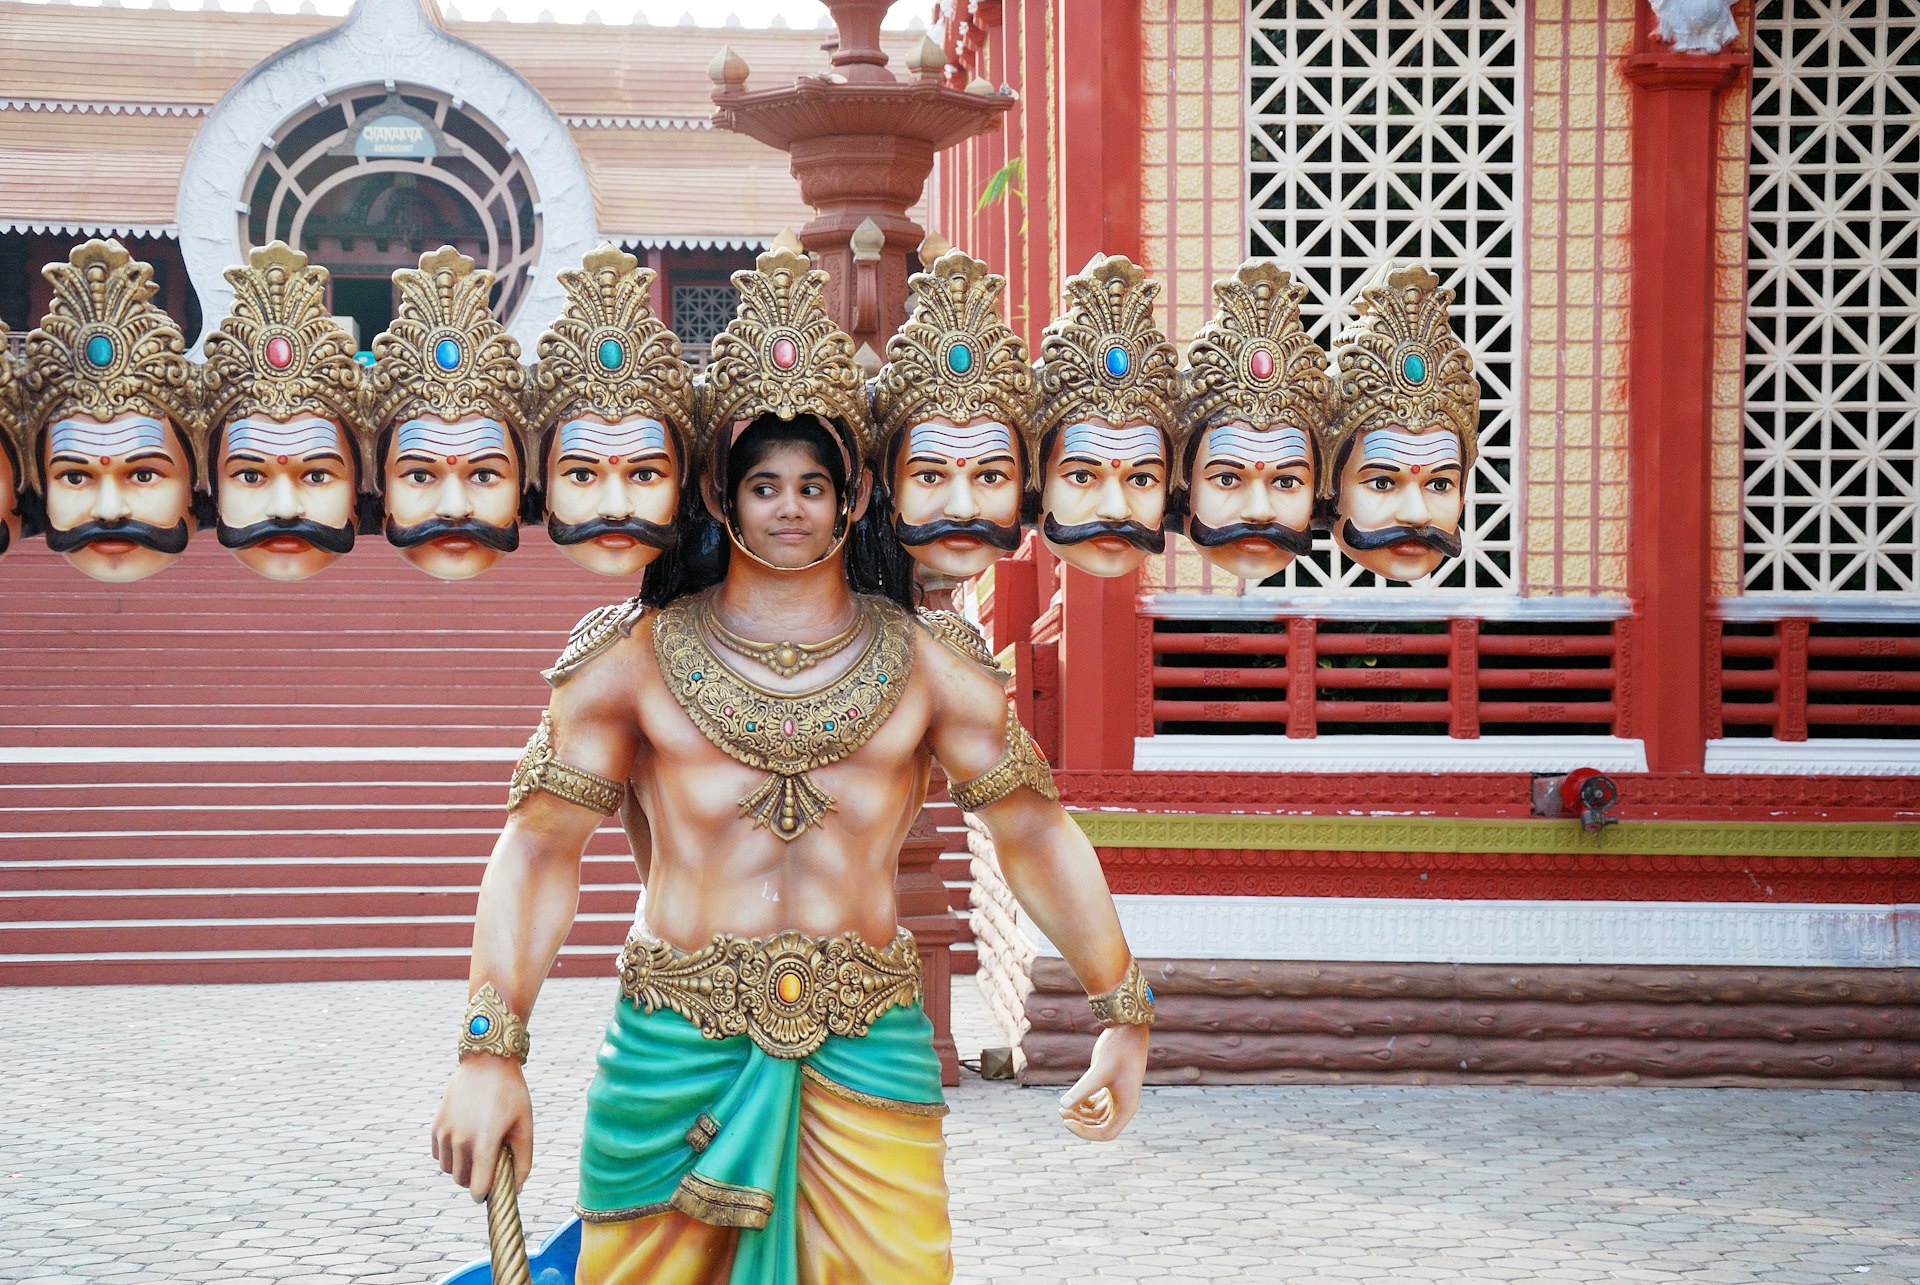 A young Indian girl poses in a cutout of a character with many heads from the film "ten months of Ravana" who is holding a sword and wearing yellow pants and a teal wrap around his waist secured with a brooch